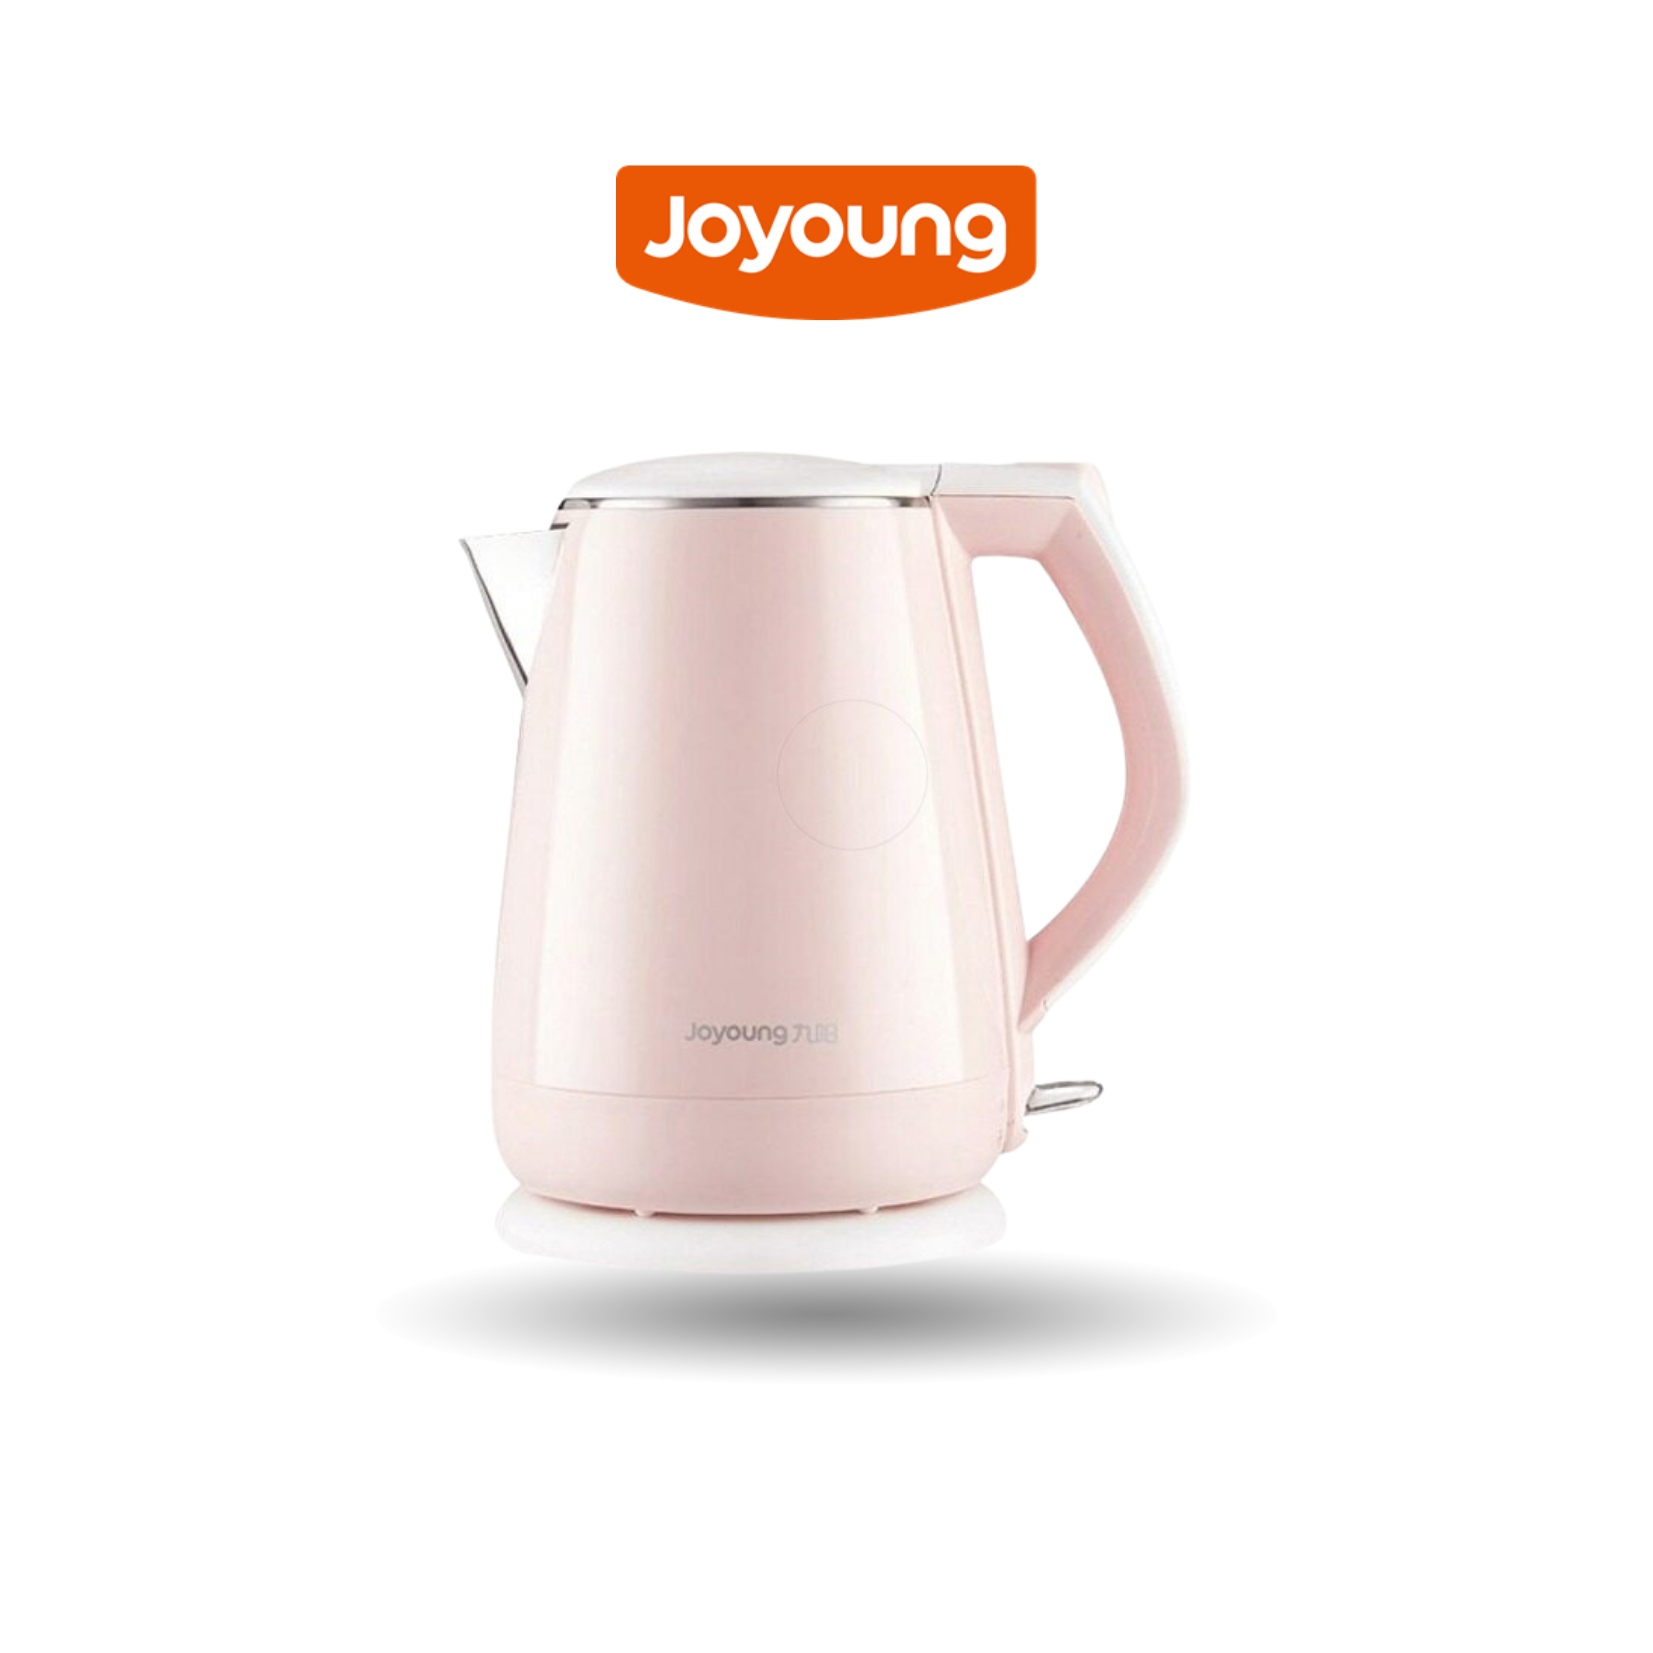 Joyoung Electric Kettle 304 Stainless Steel Precise Temperature Control 1.7L Large Capacity